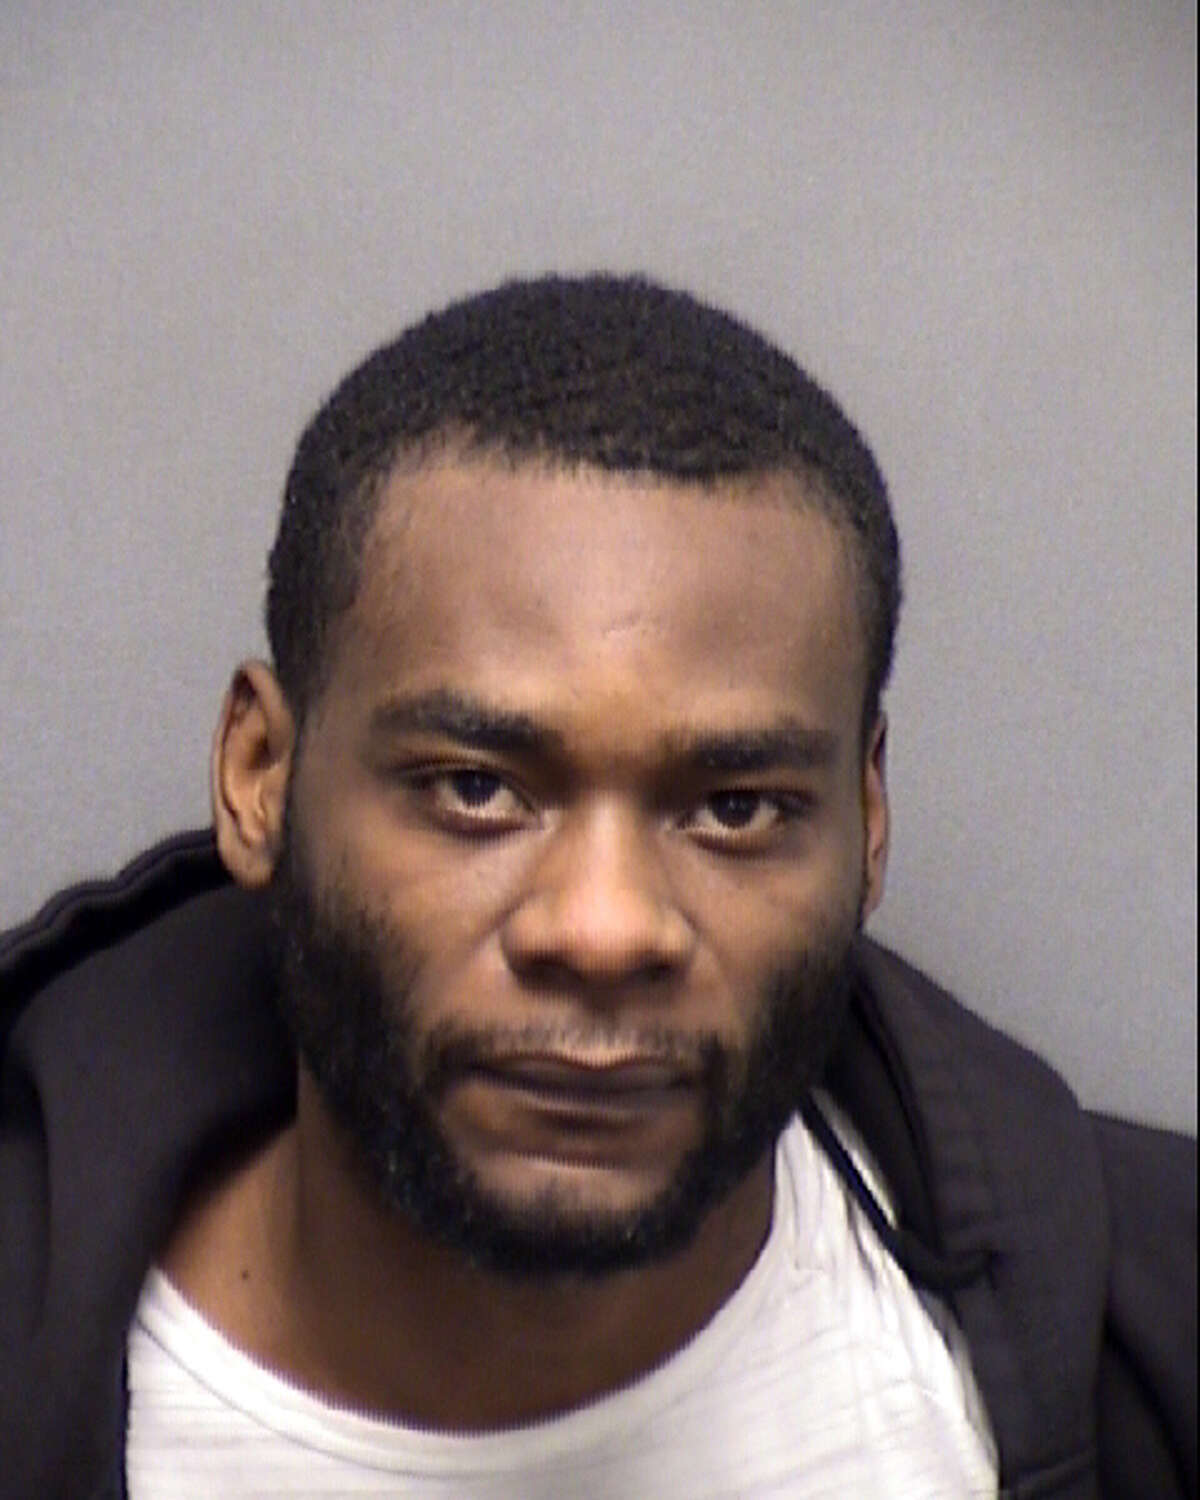 Drevon Alexander Perkins now faces a charge of super aggravated sexual assault of a child. He was booked into the Bexar County Jail on a $100,000 bail.